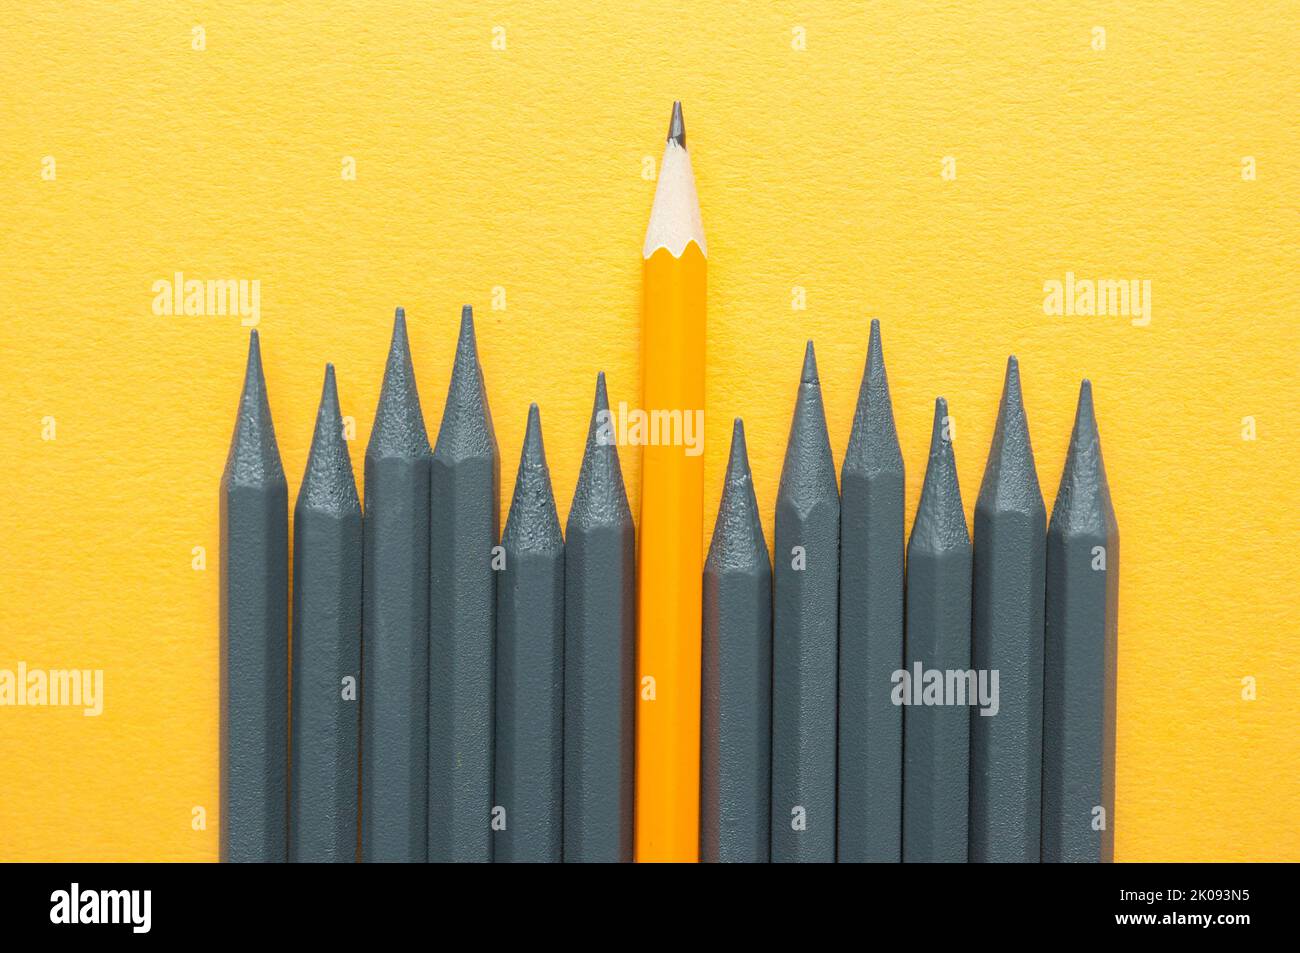 Orange pencil standing out amongst grey pencils Stock Photo